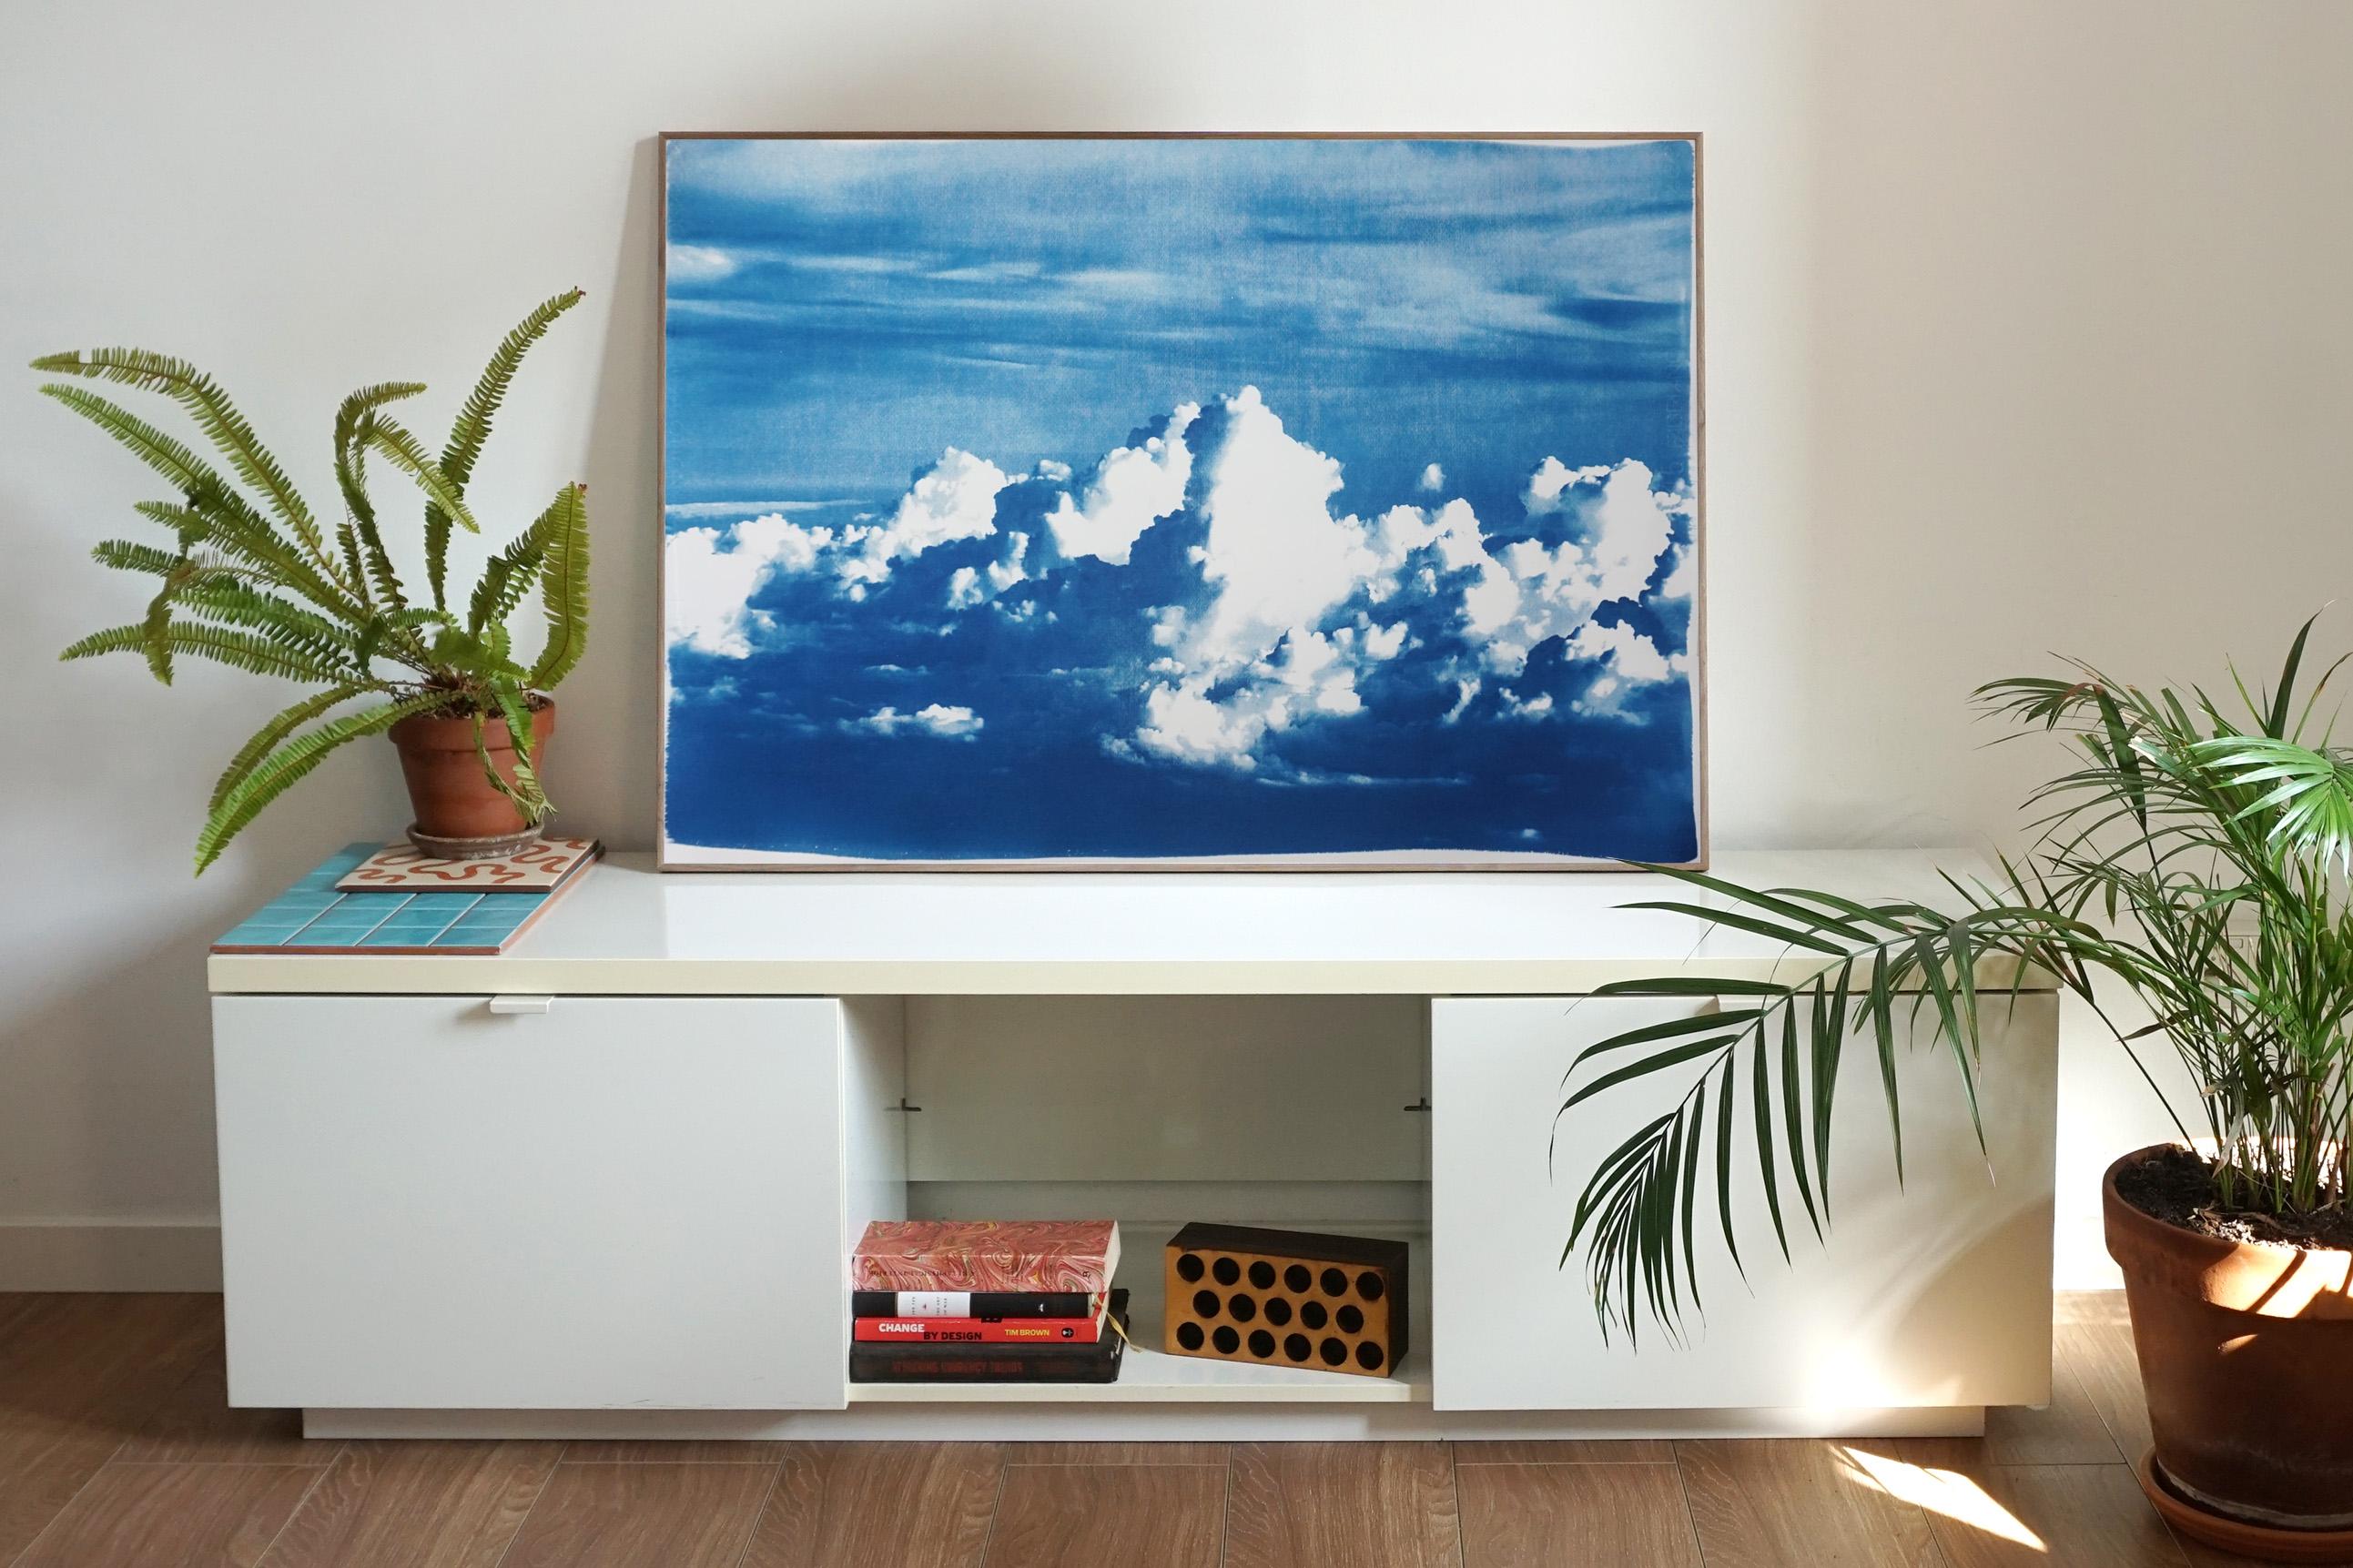 Blustery Clouds After a Storm, Sky Blue Handprinted Cyanotype, Meaningful Scene - Art by Kind of Cyan